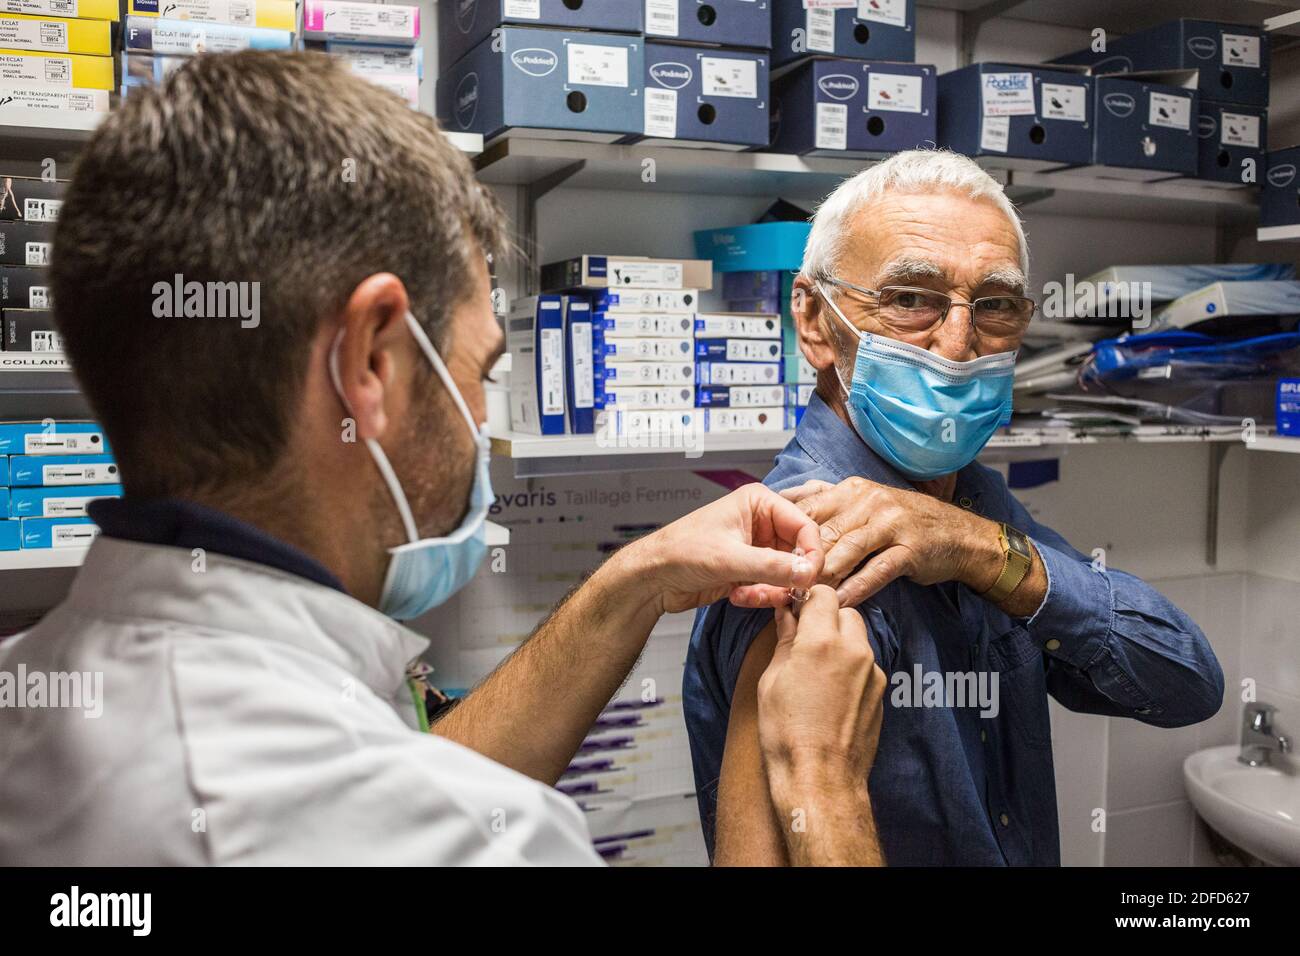 Flu vaccination in a pharmacy, France, October 2020. Stock Photo